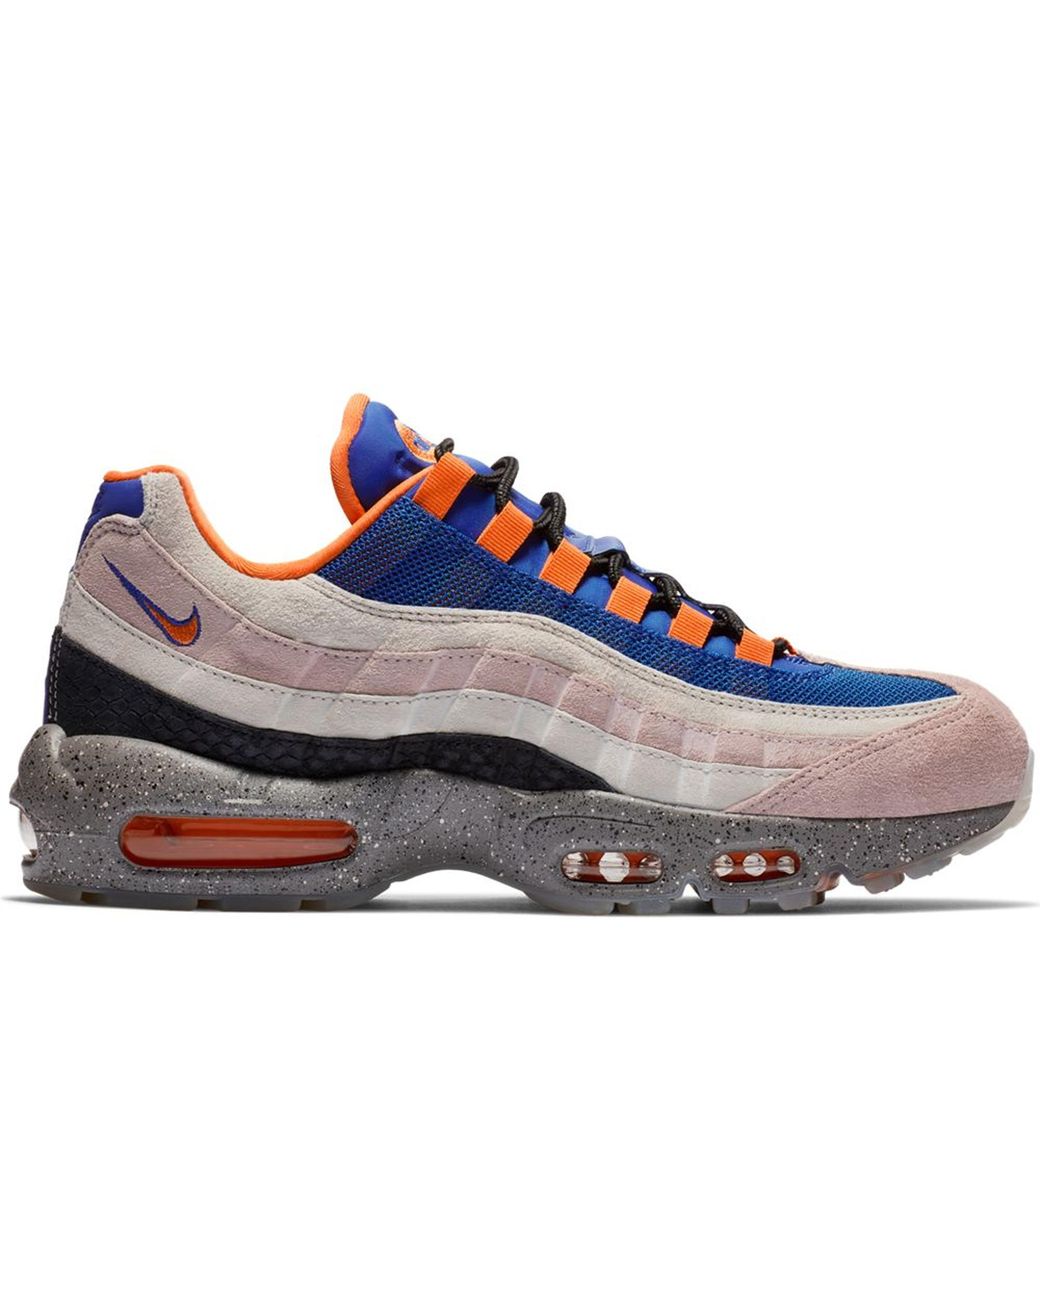 Nike Air Max 95 King Of The Mountain in 